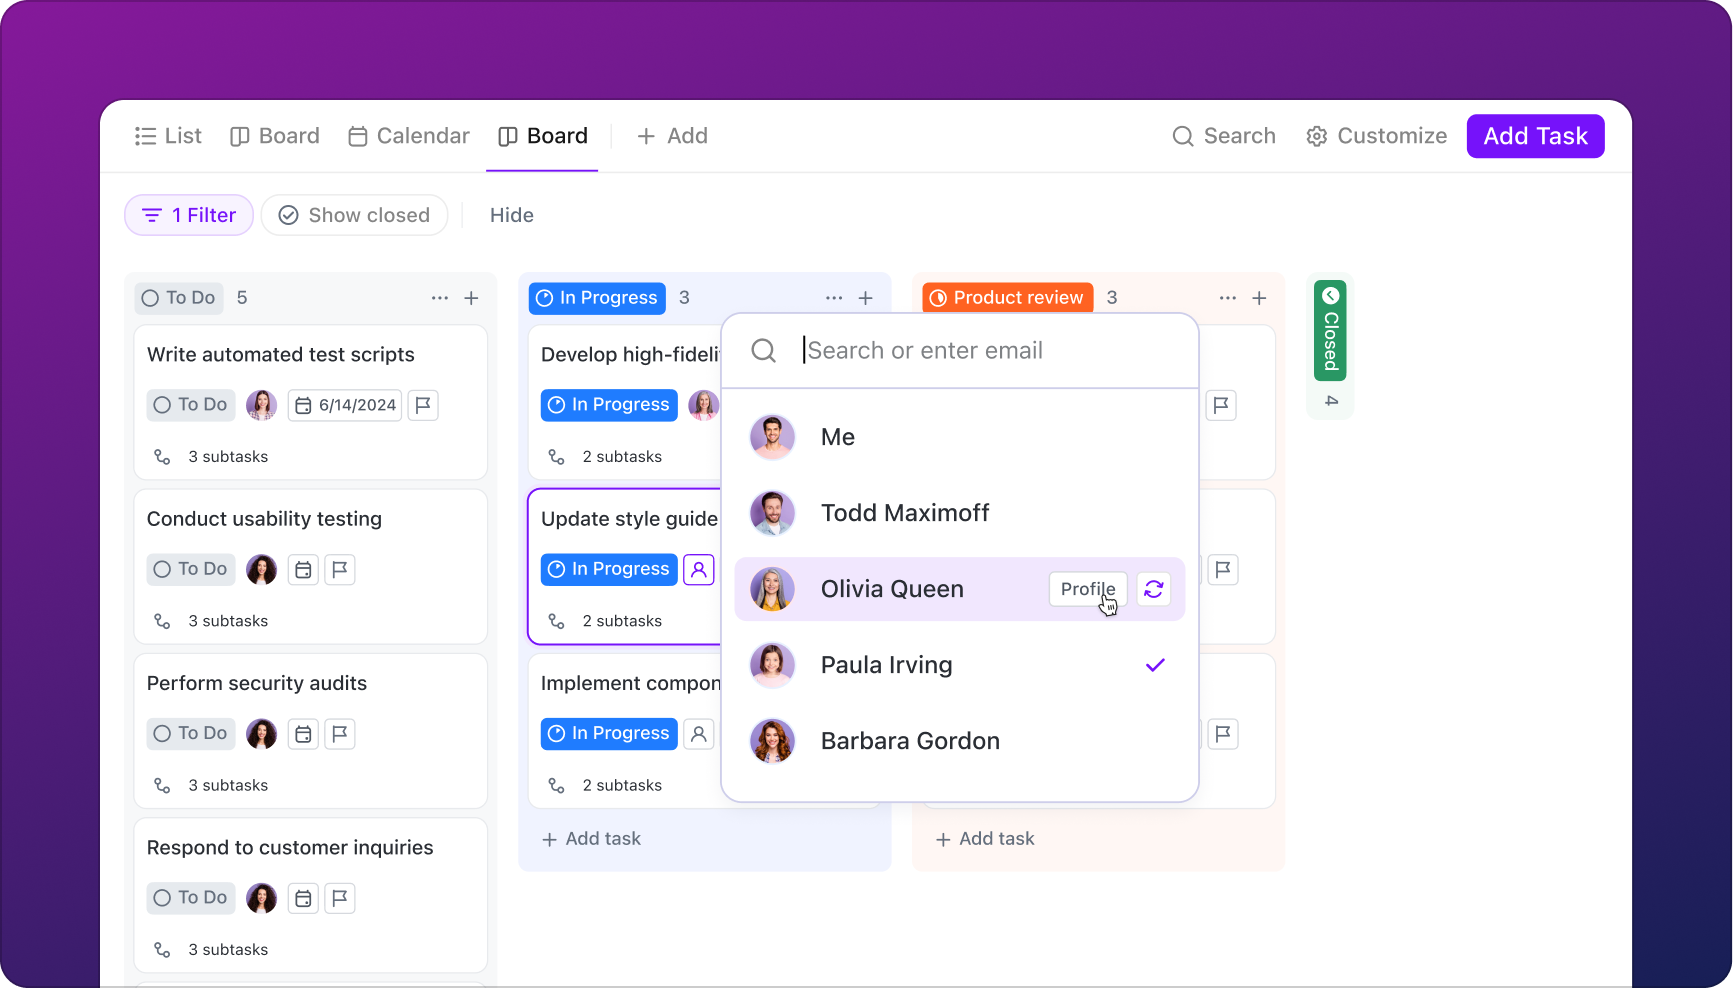 Real-time collaboration on tasks